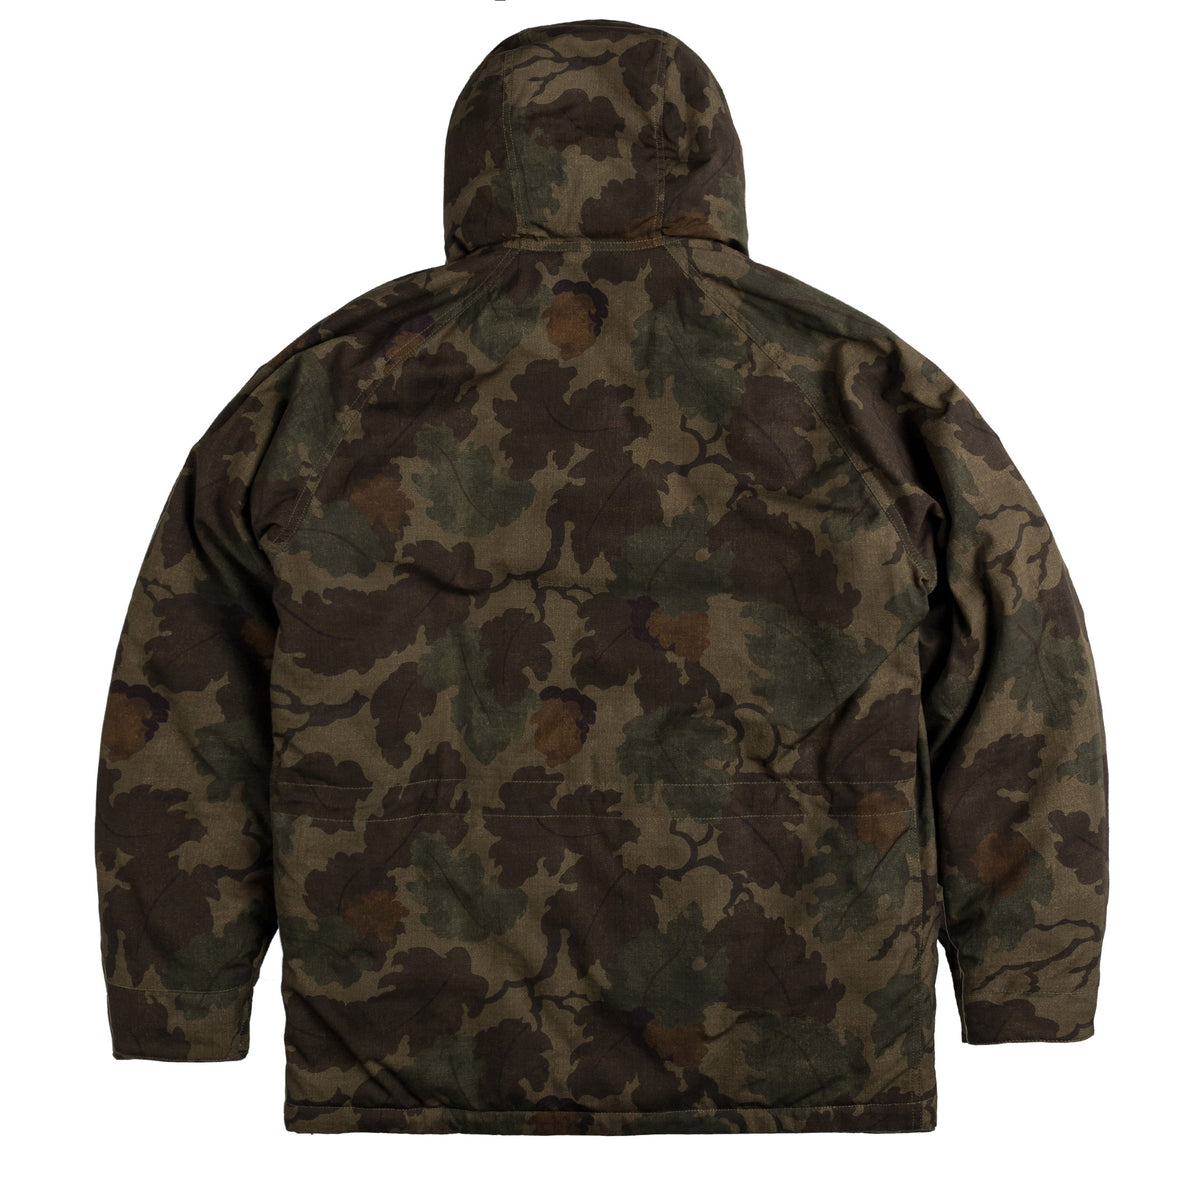 Mitchell Camo Jacket in Ripstop Cotton - Men - Green